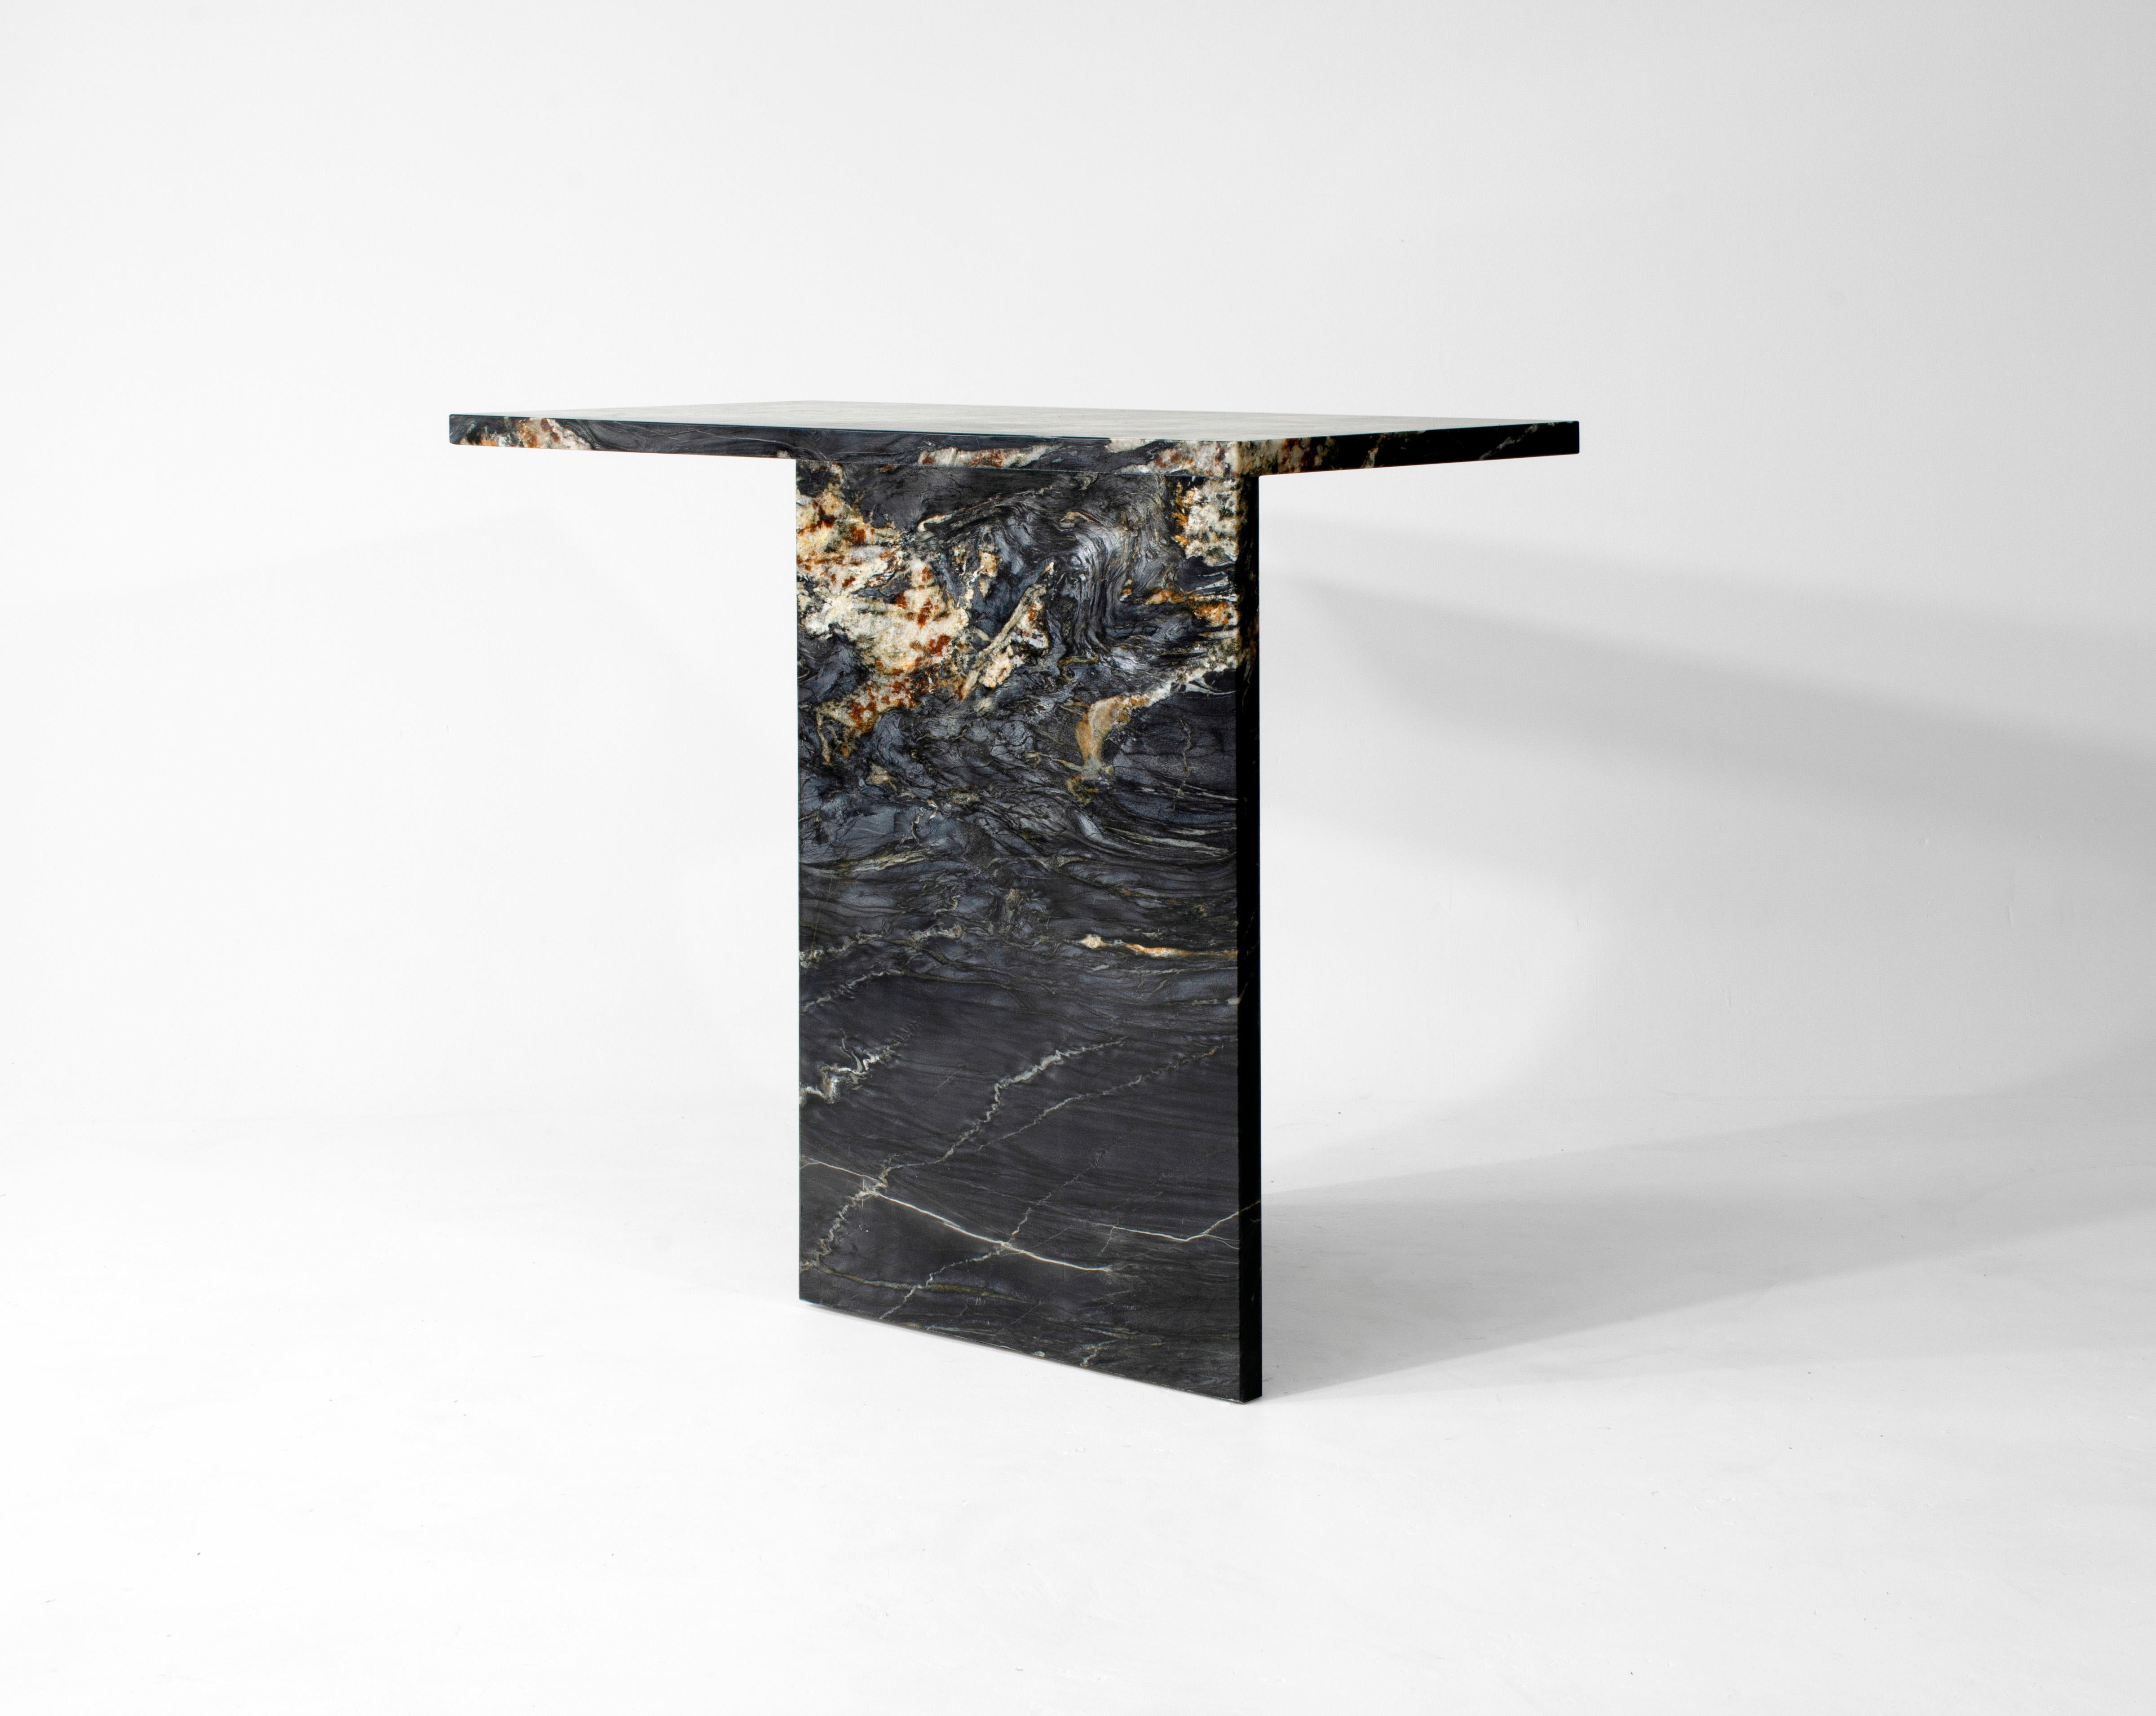 A console which has four distinct elevations. The strength and weight of the piece creates a sense of stability while simultaneously appearing as if it may fall over at any minute. The asymmetrical, triangular base in combination with the